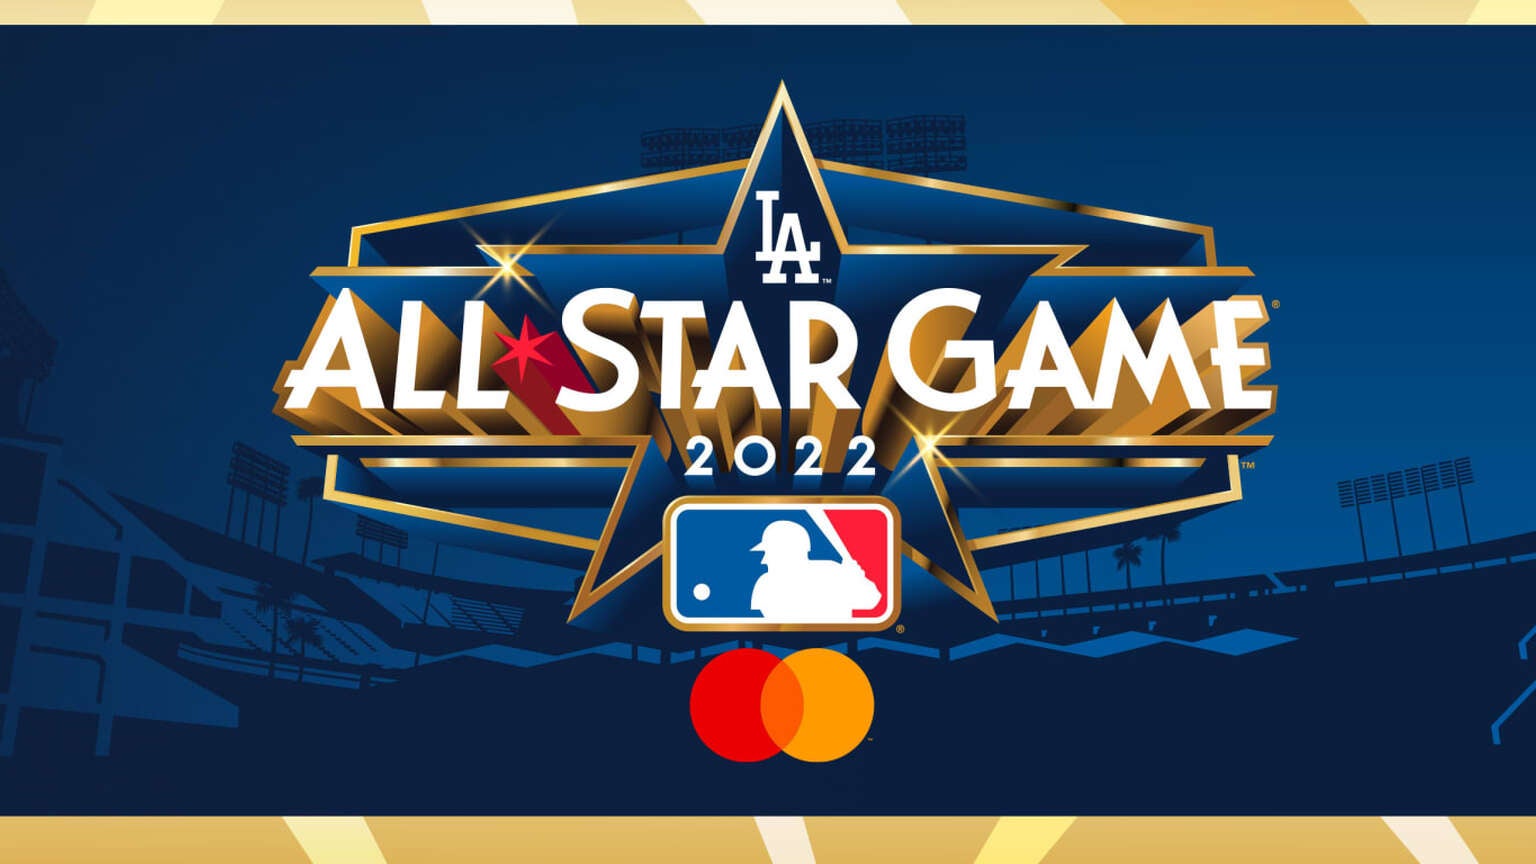 You Can Stream 2022 MLB AllStar Game in 4K, and You Won't Need an